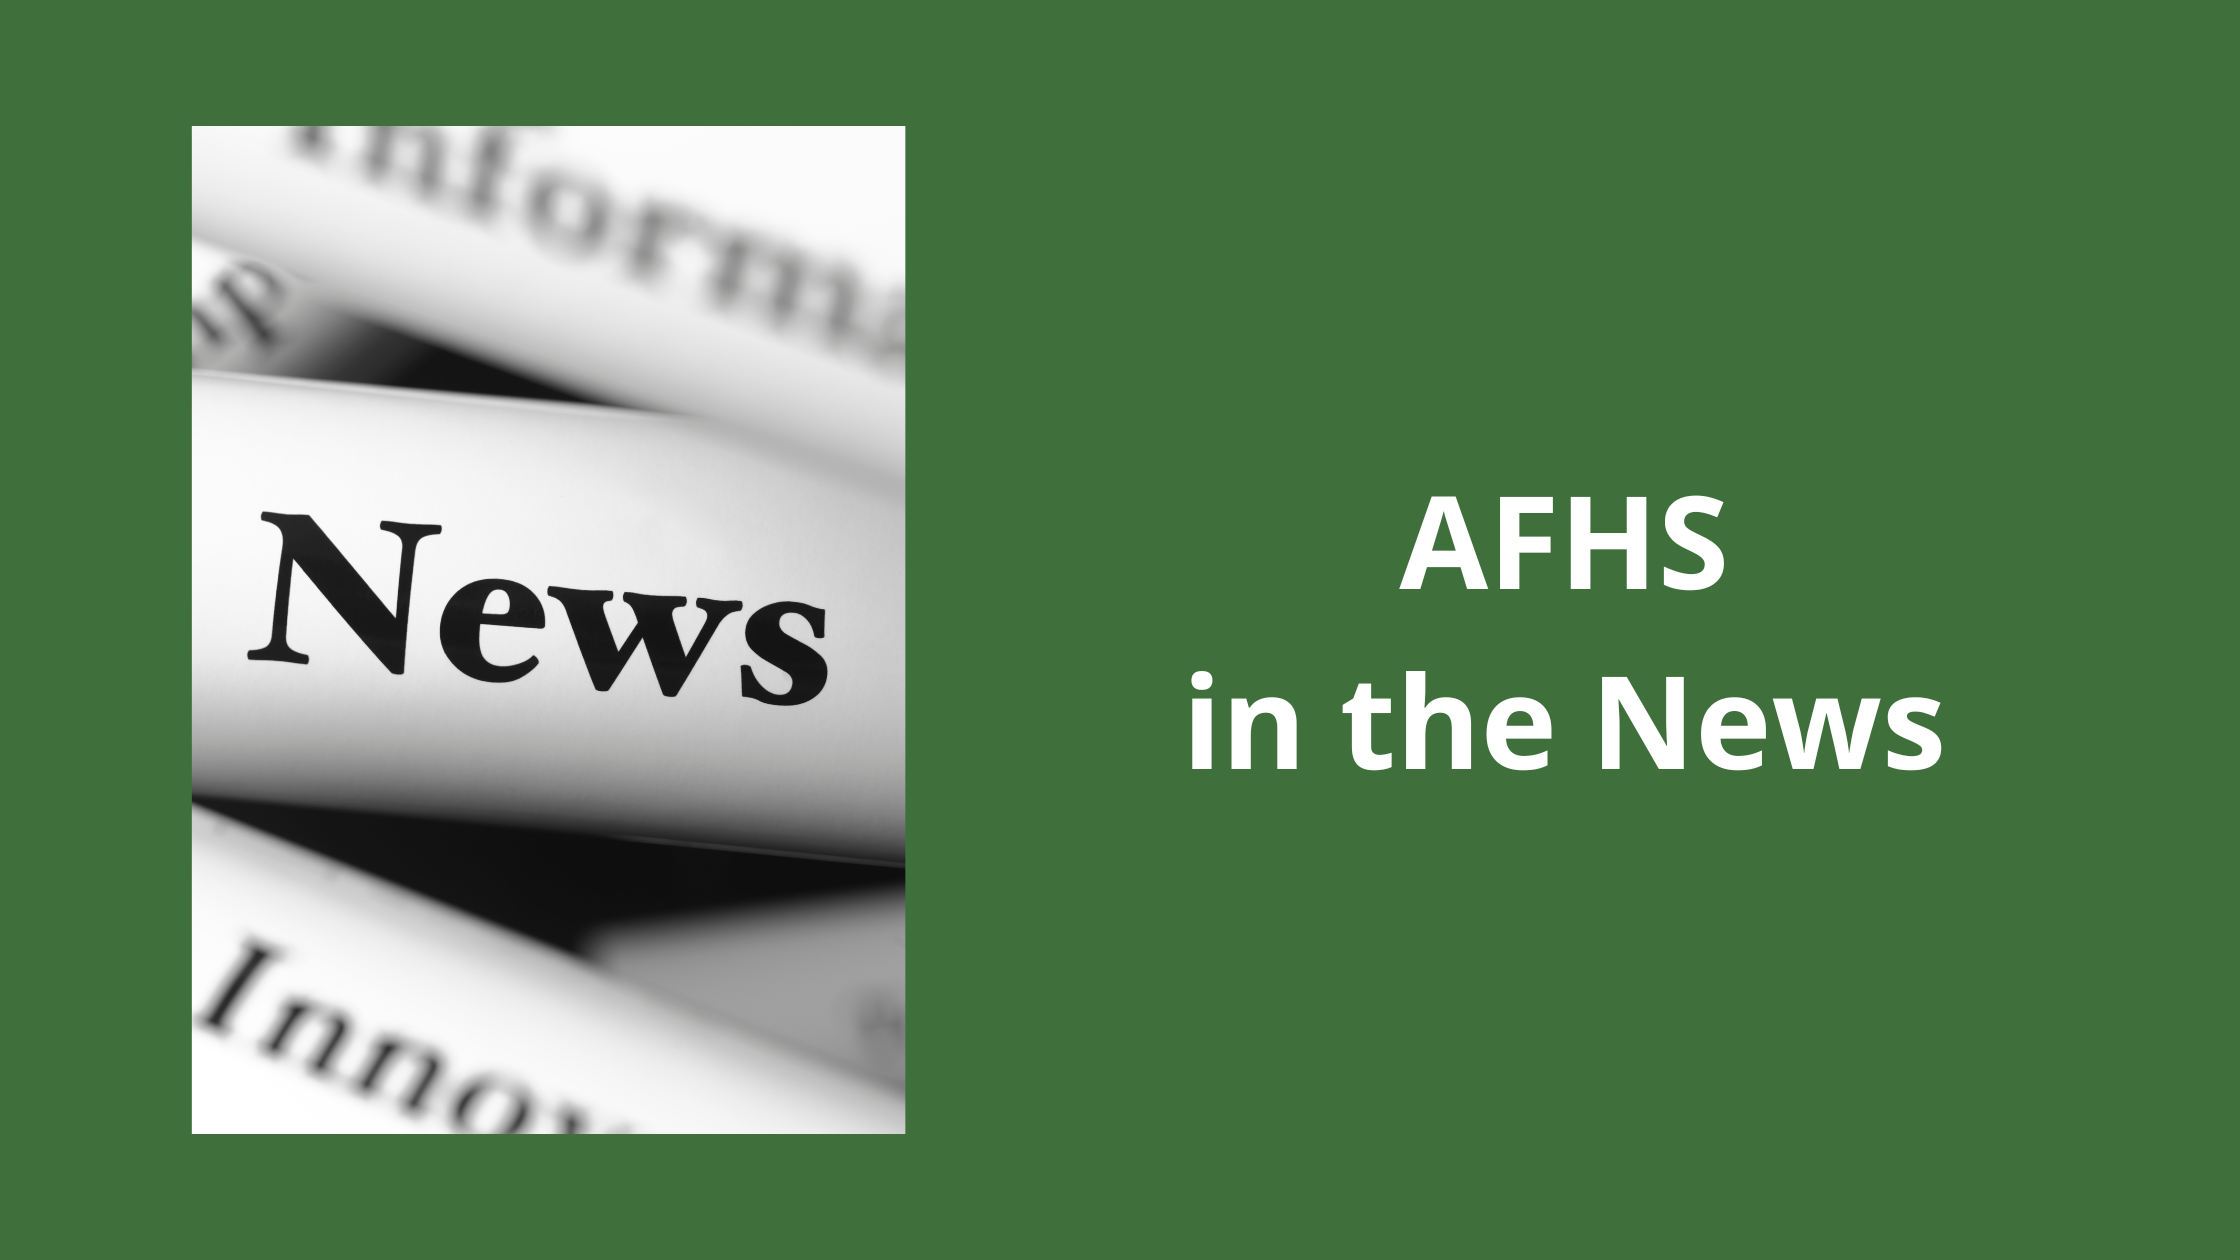 AFHS In The News Again